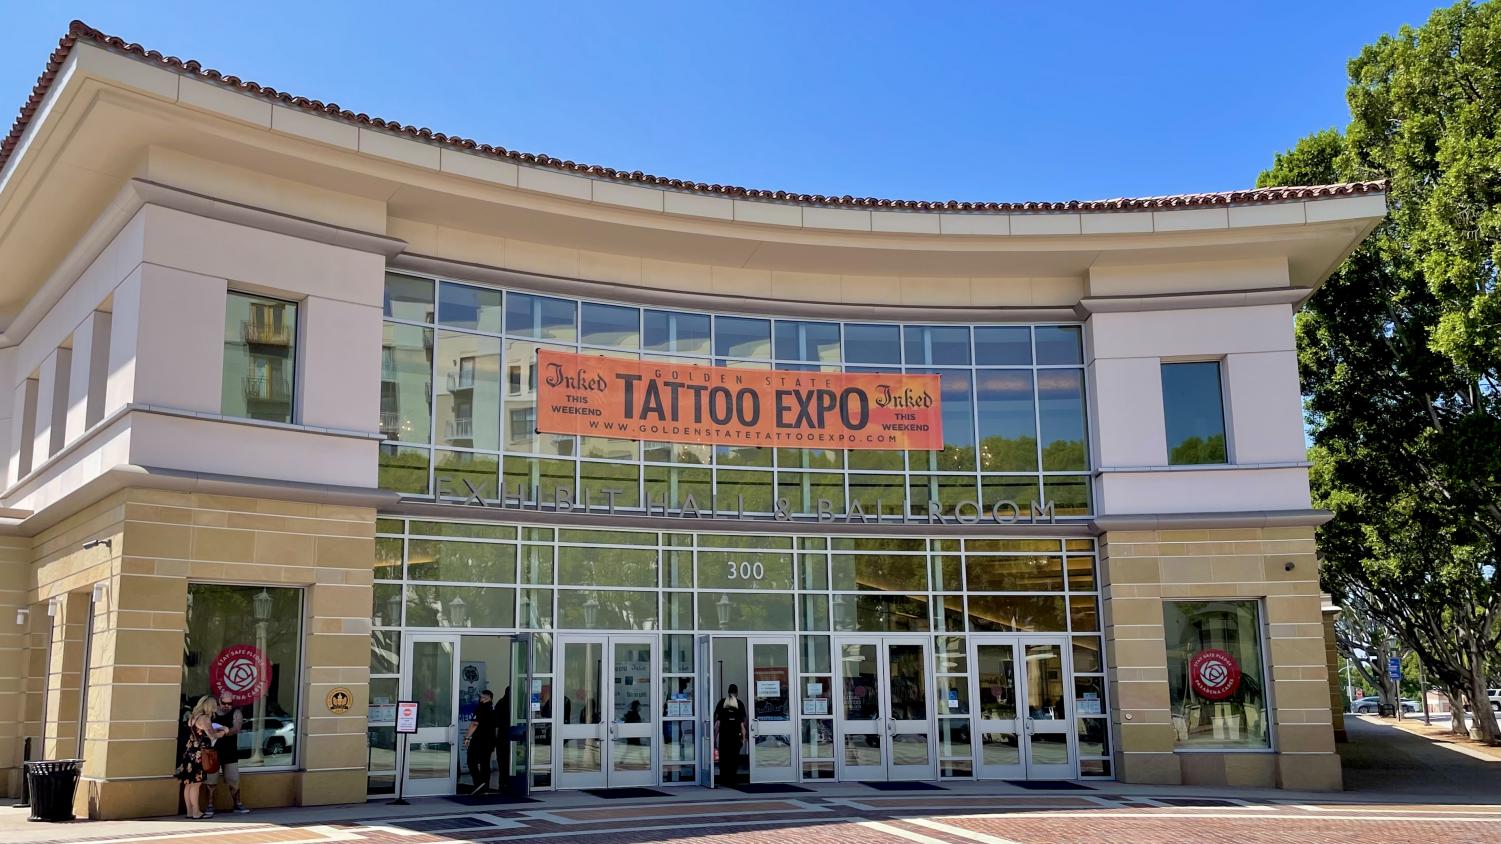 War Paint Tattoo Studio  Come visit us on September 1618th at the Golden  State tattoo convention Again reminder shop will be closed these days If  you would like to get tattooed